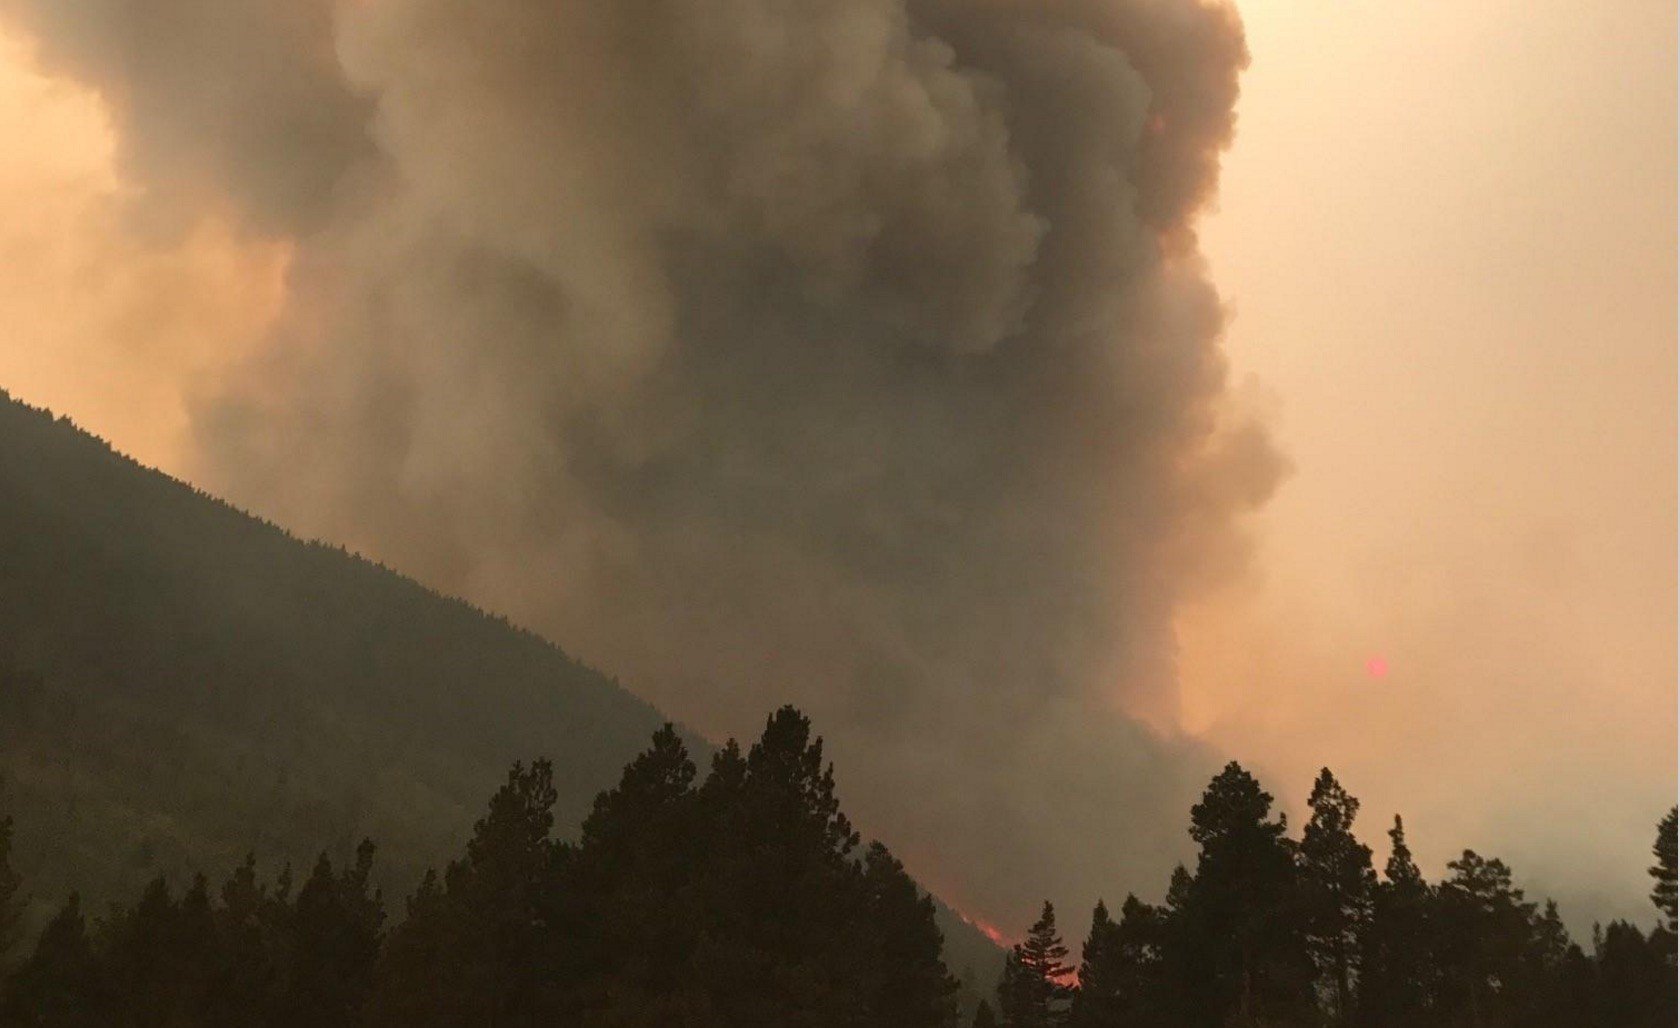 Alice Creek fire grows, more evacuation orders issued